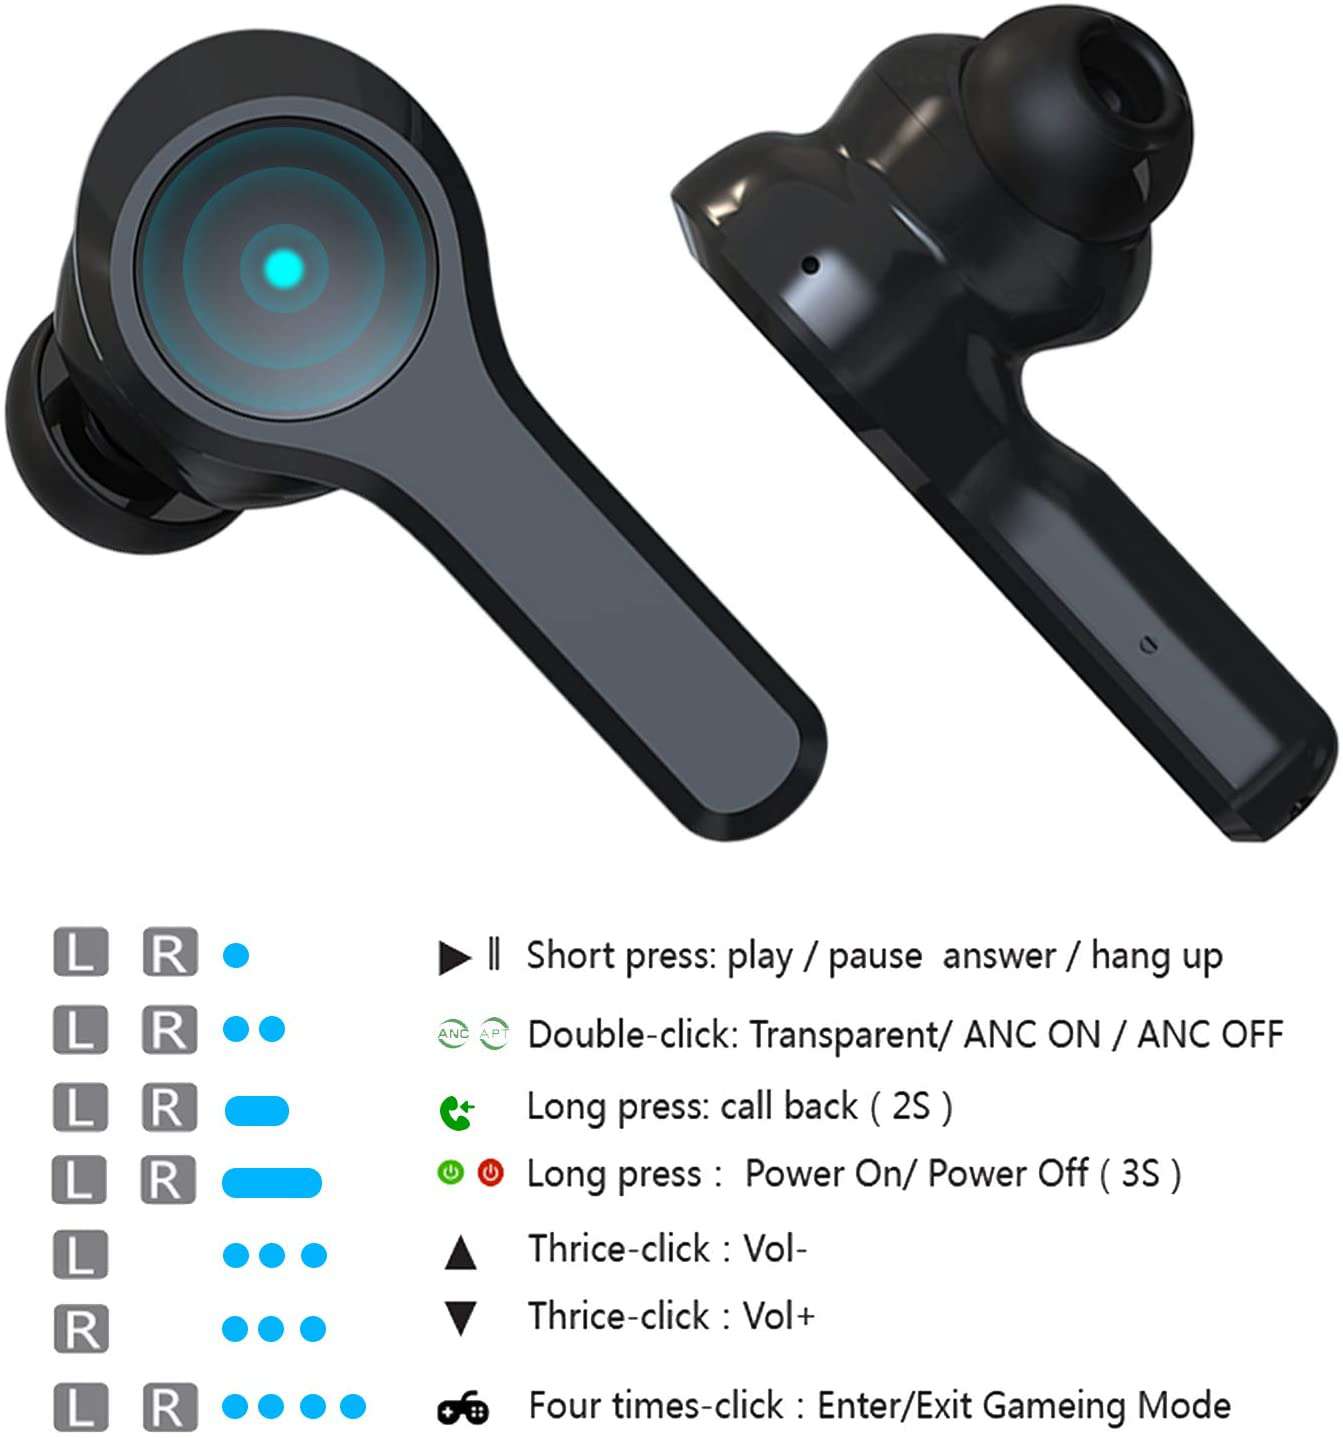 Introduction headphone touch controls, such as Four times-click: Enter/Exit Gaming Mode.